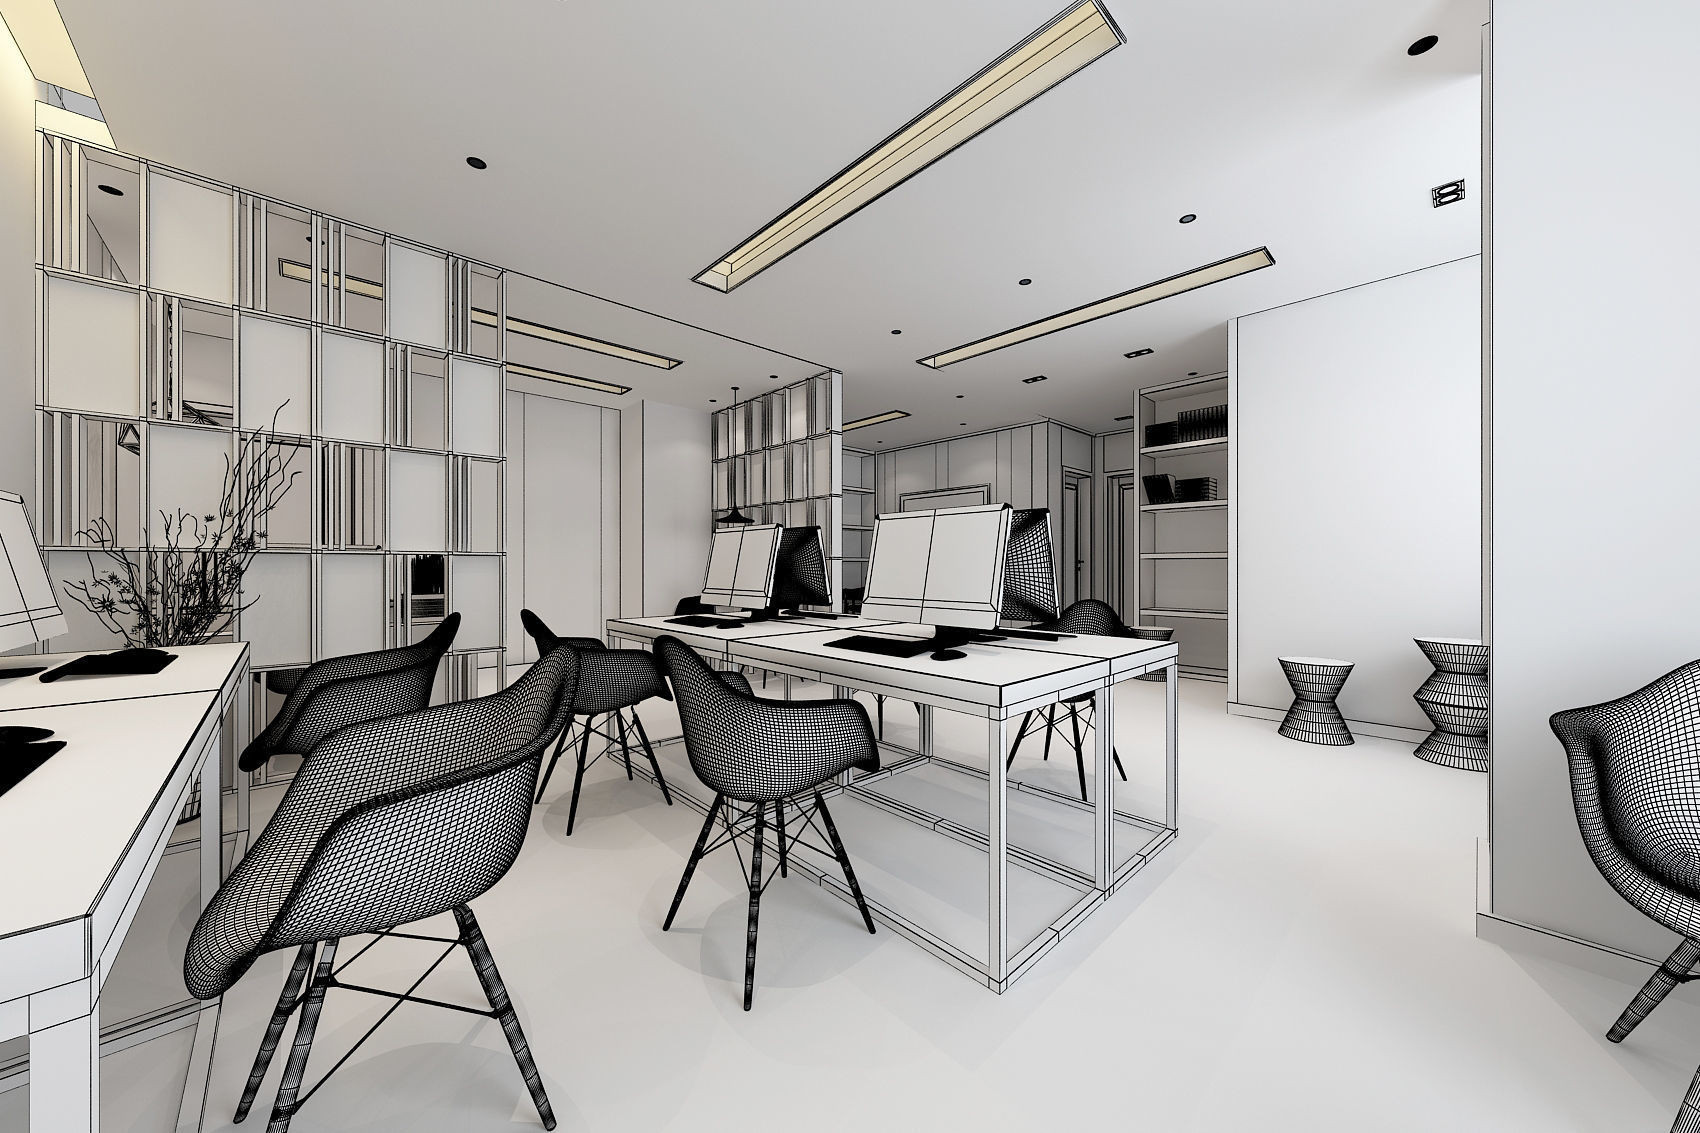 3D modeling allows interior designers to easily present an interior or exte...